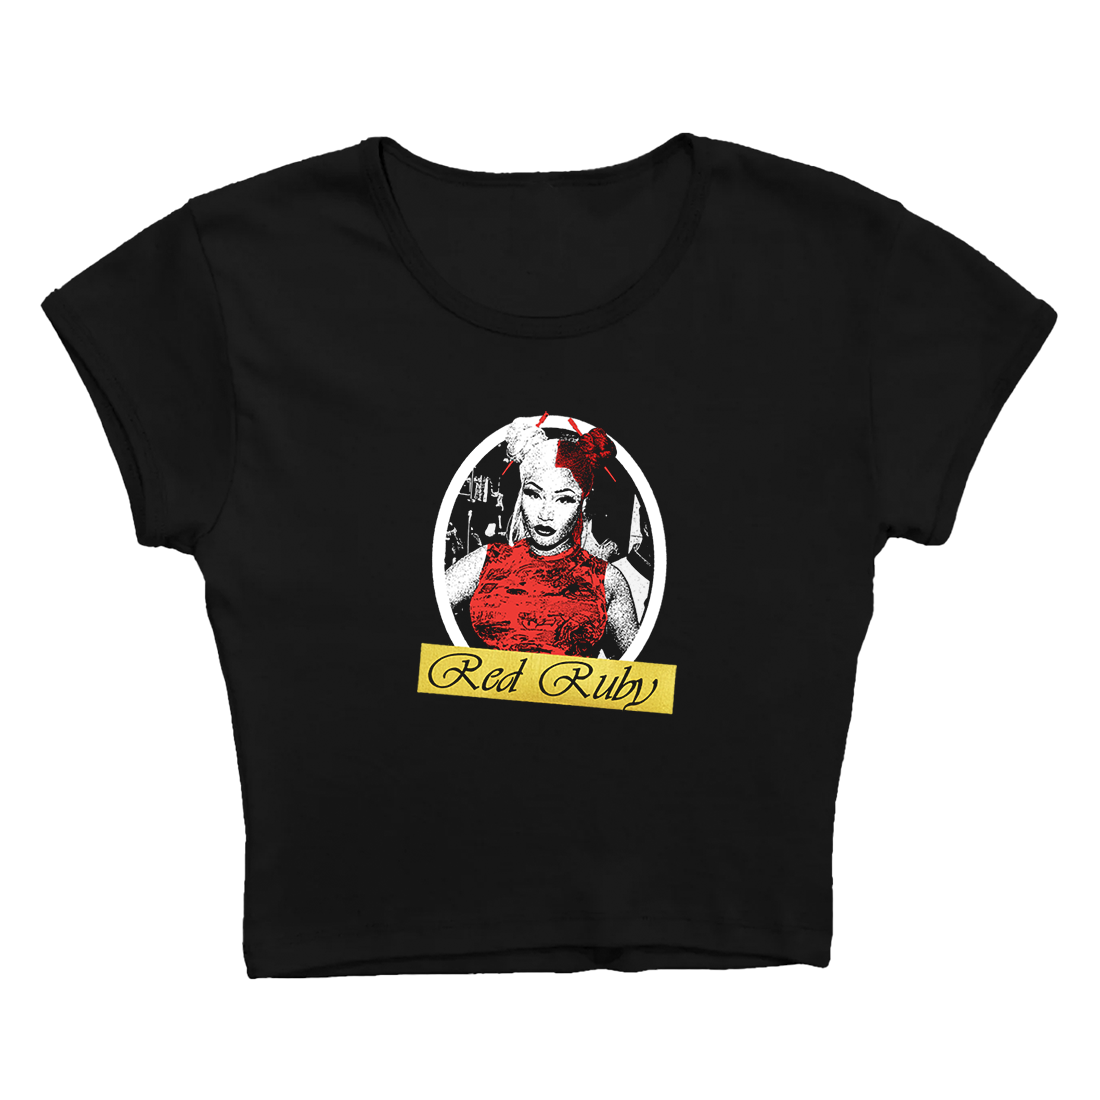 Red Ruby Baby Tee